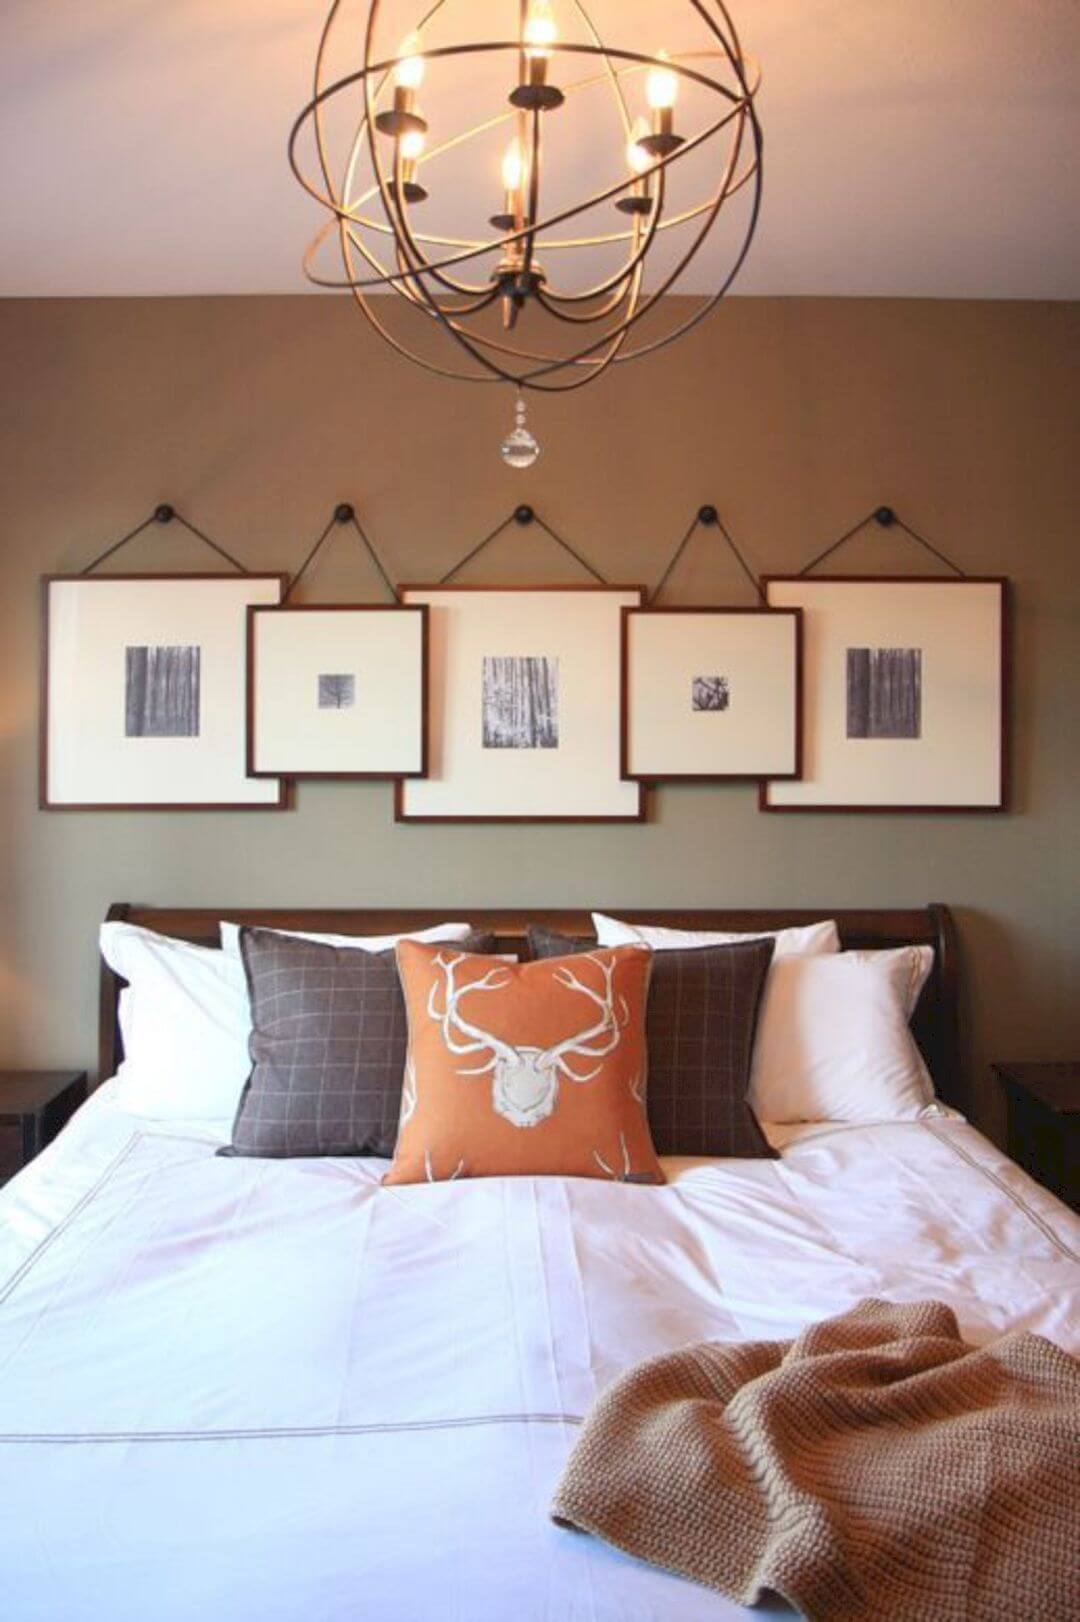 20+ Best Bedroom Wall Decor Ideas and Designs for 20